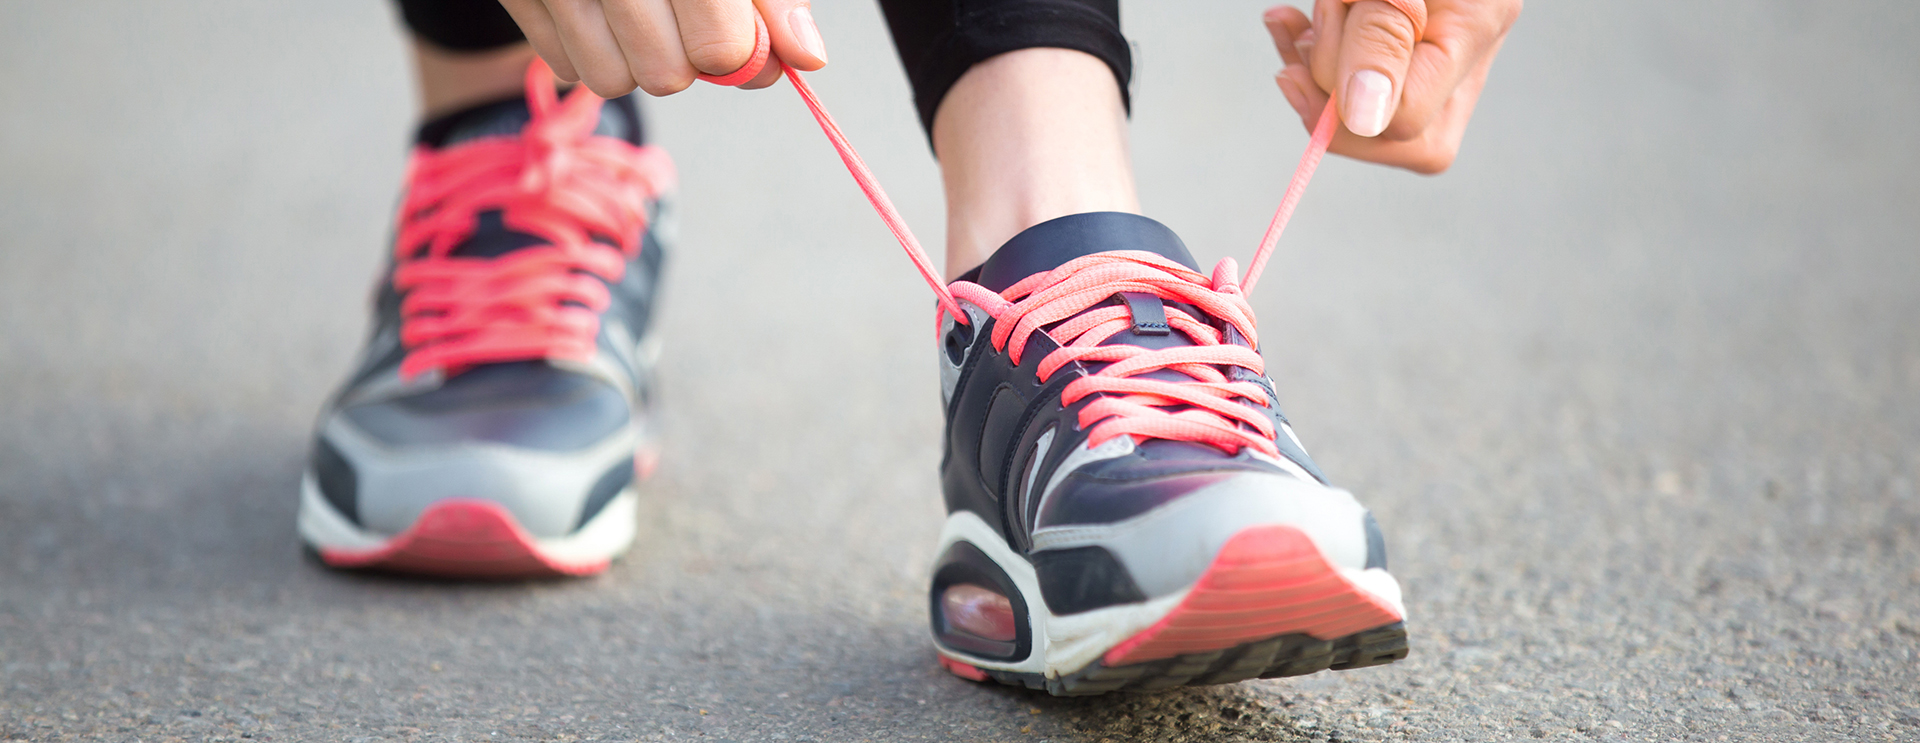 How To Lace Running Shoes For Wide Feet